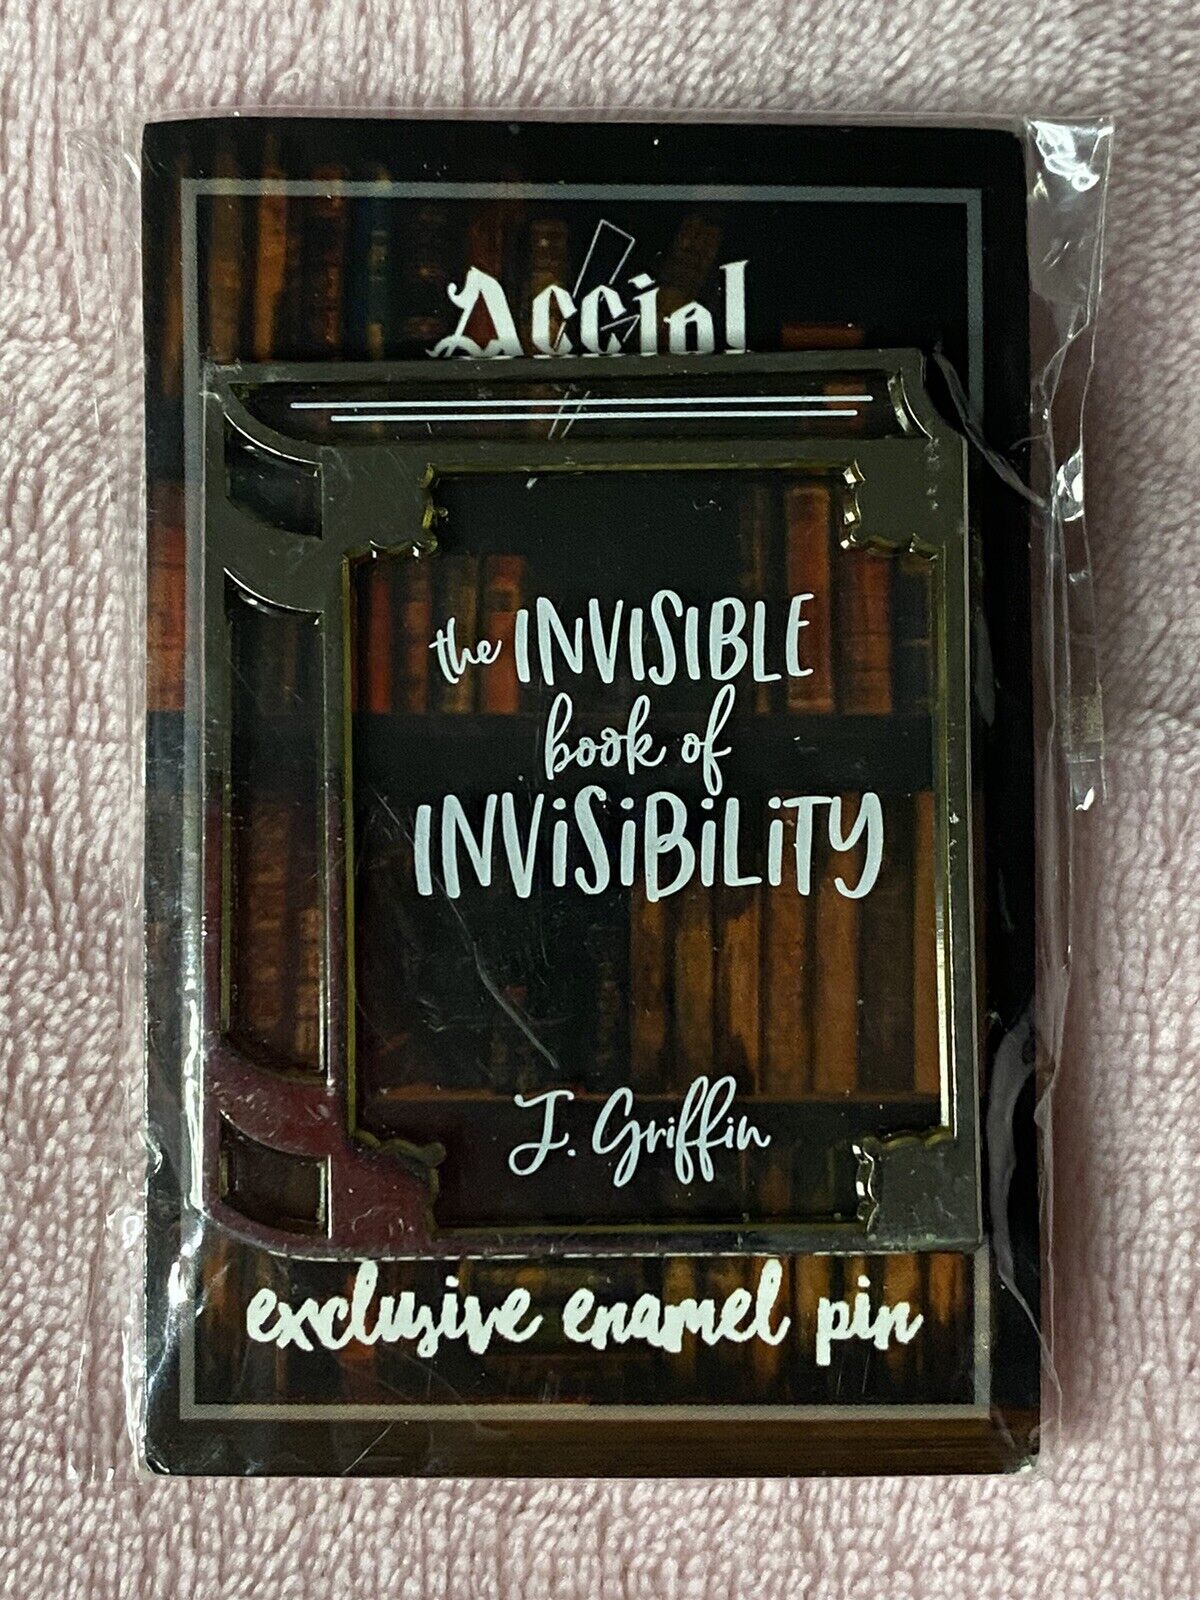 Harry Potter Pin the“Invisible book of Invisibility”J.Griffin By Accio exclusive